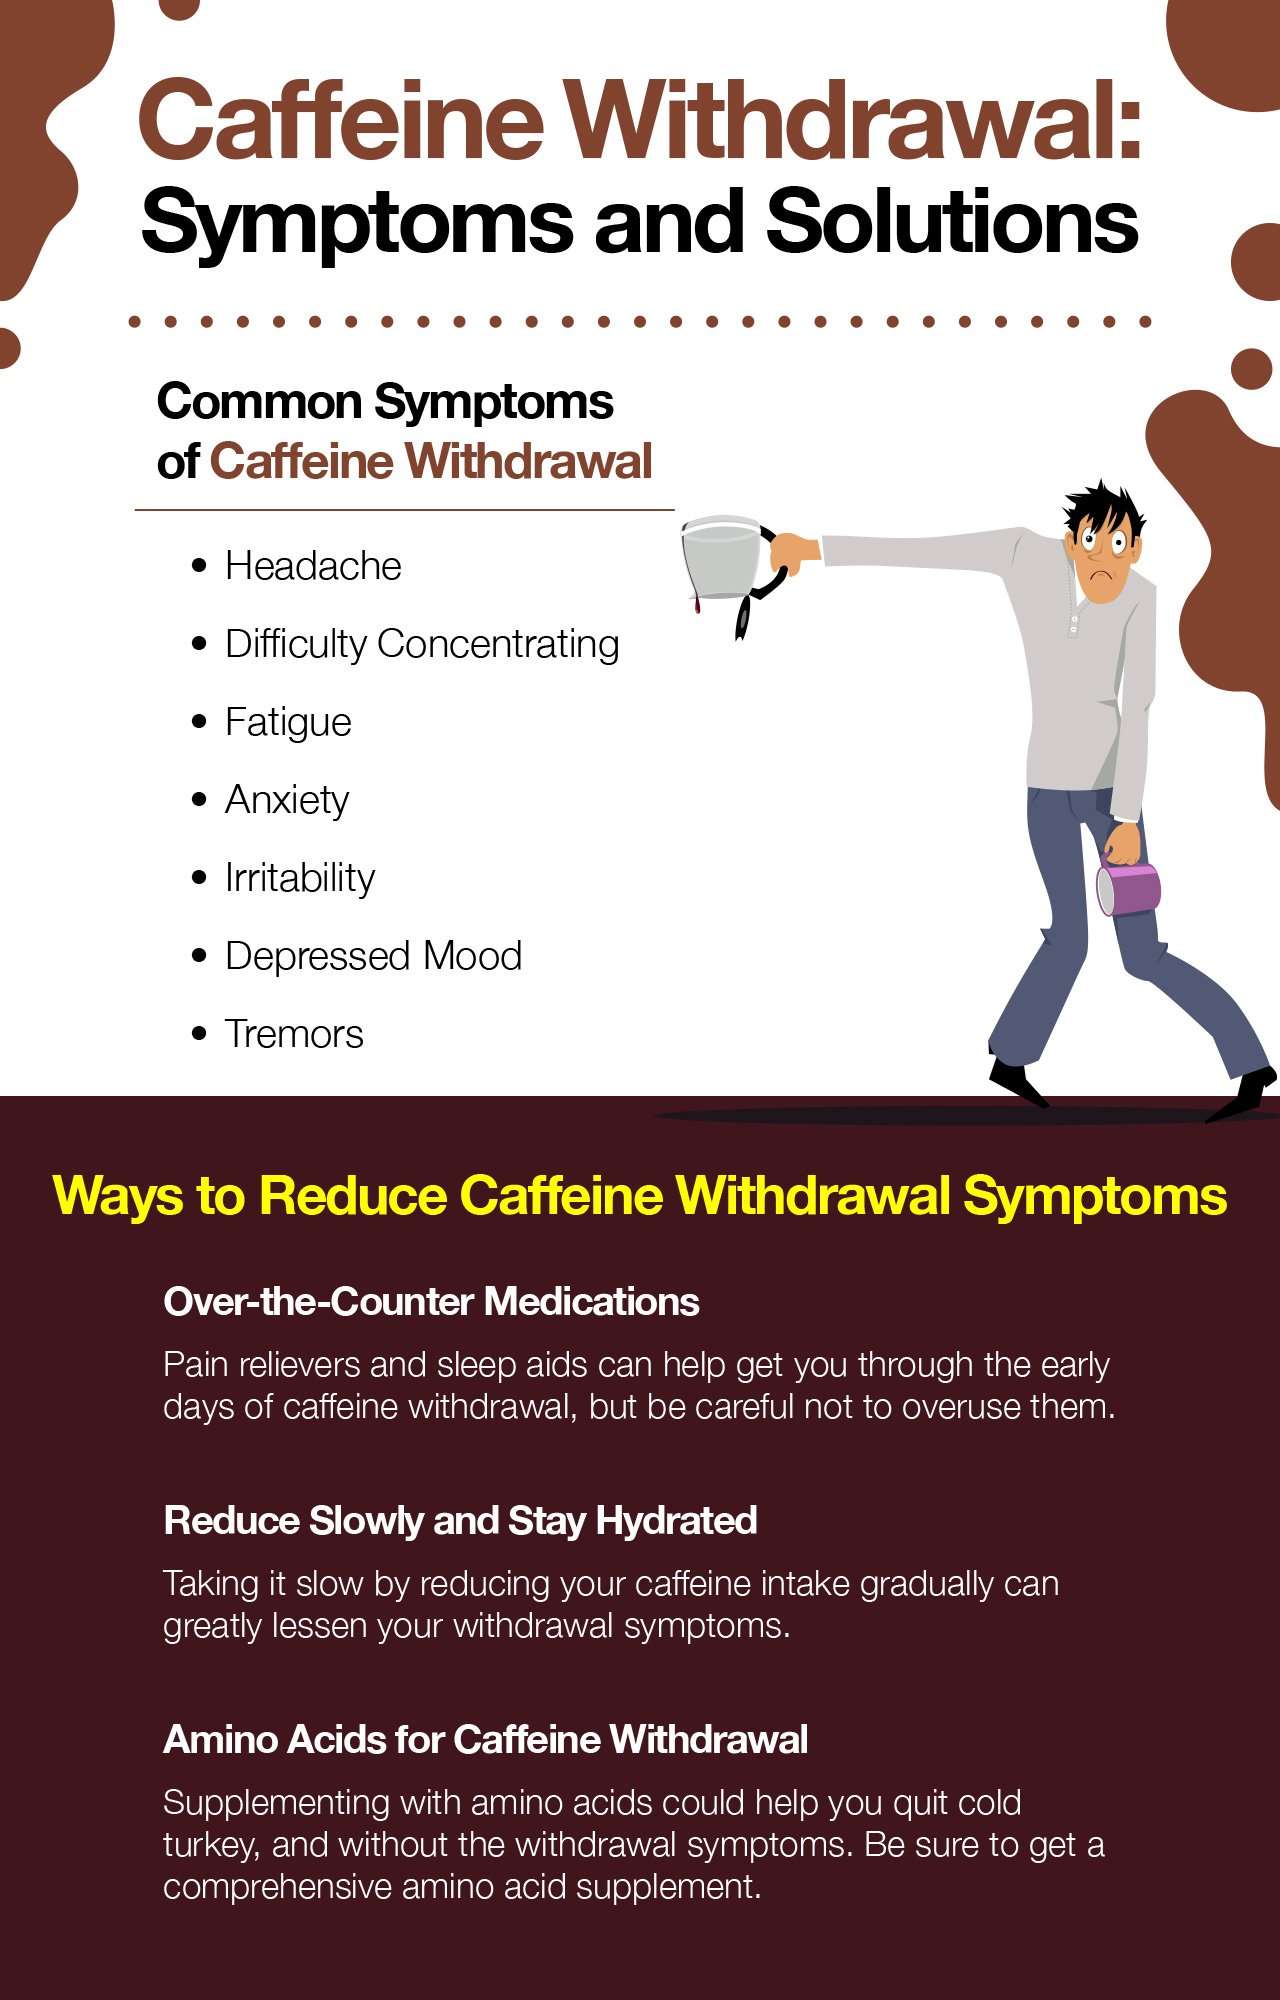 Caffeine Withdrawal: Symptoms and Solutions